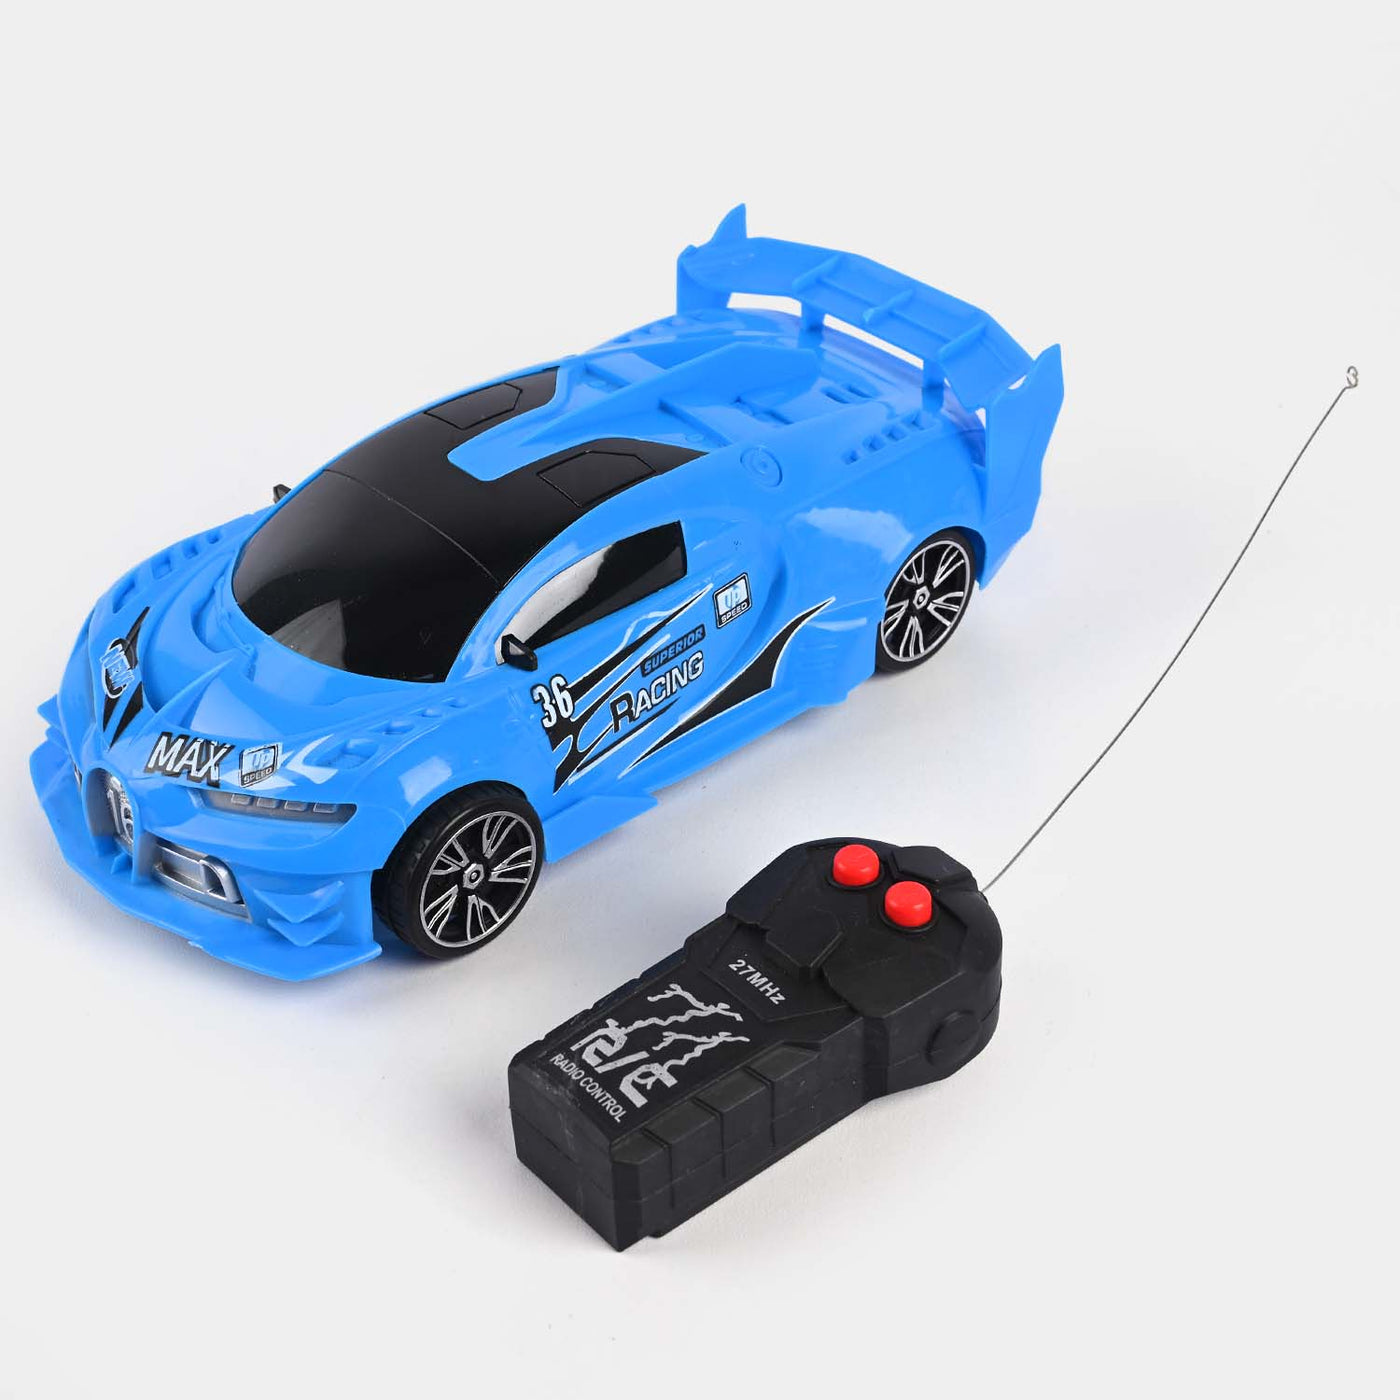 REMOTE CONTROL CAR WITH 3D LIGHTS FOR KIDS